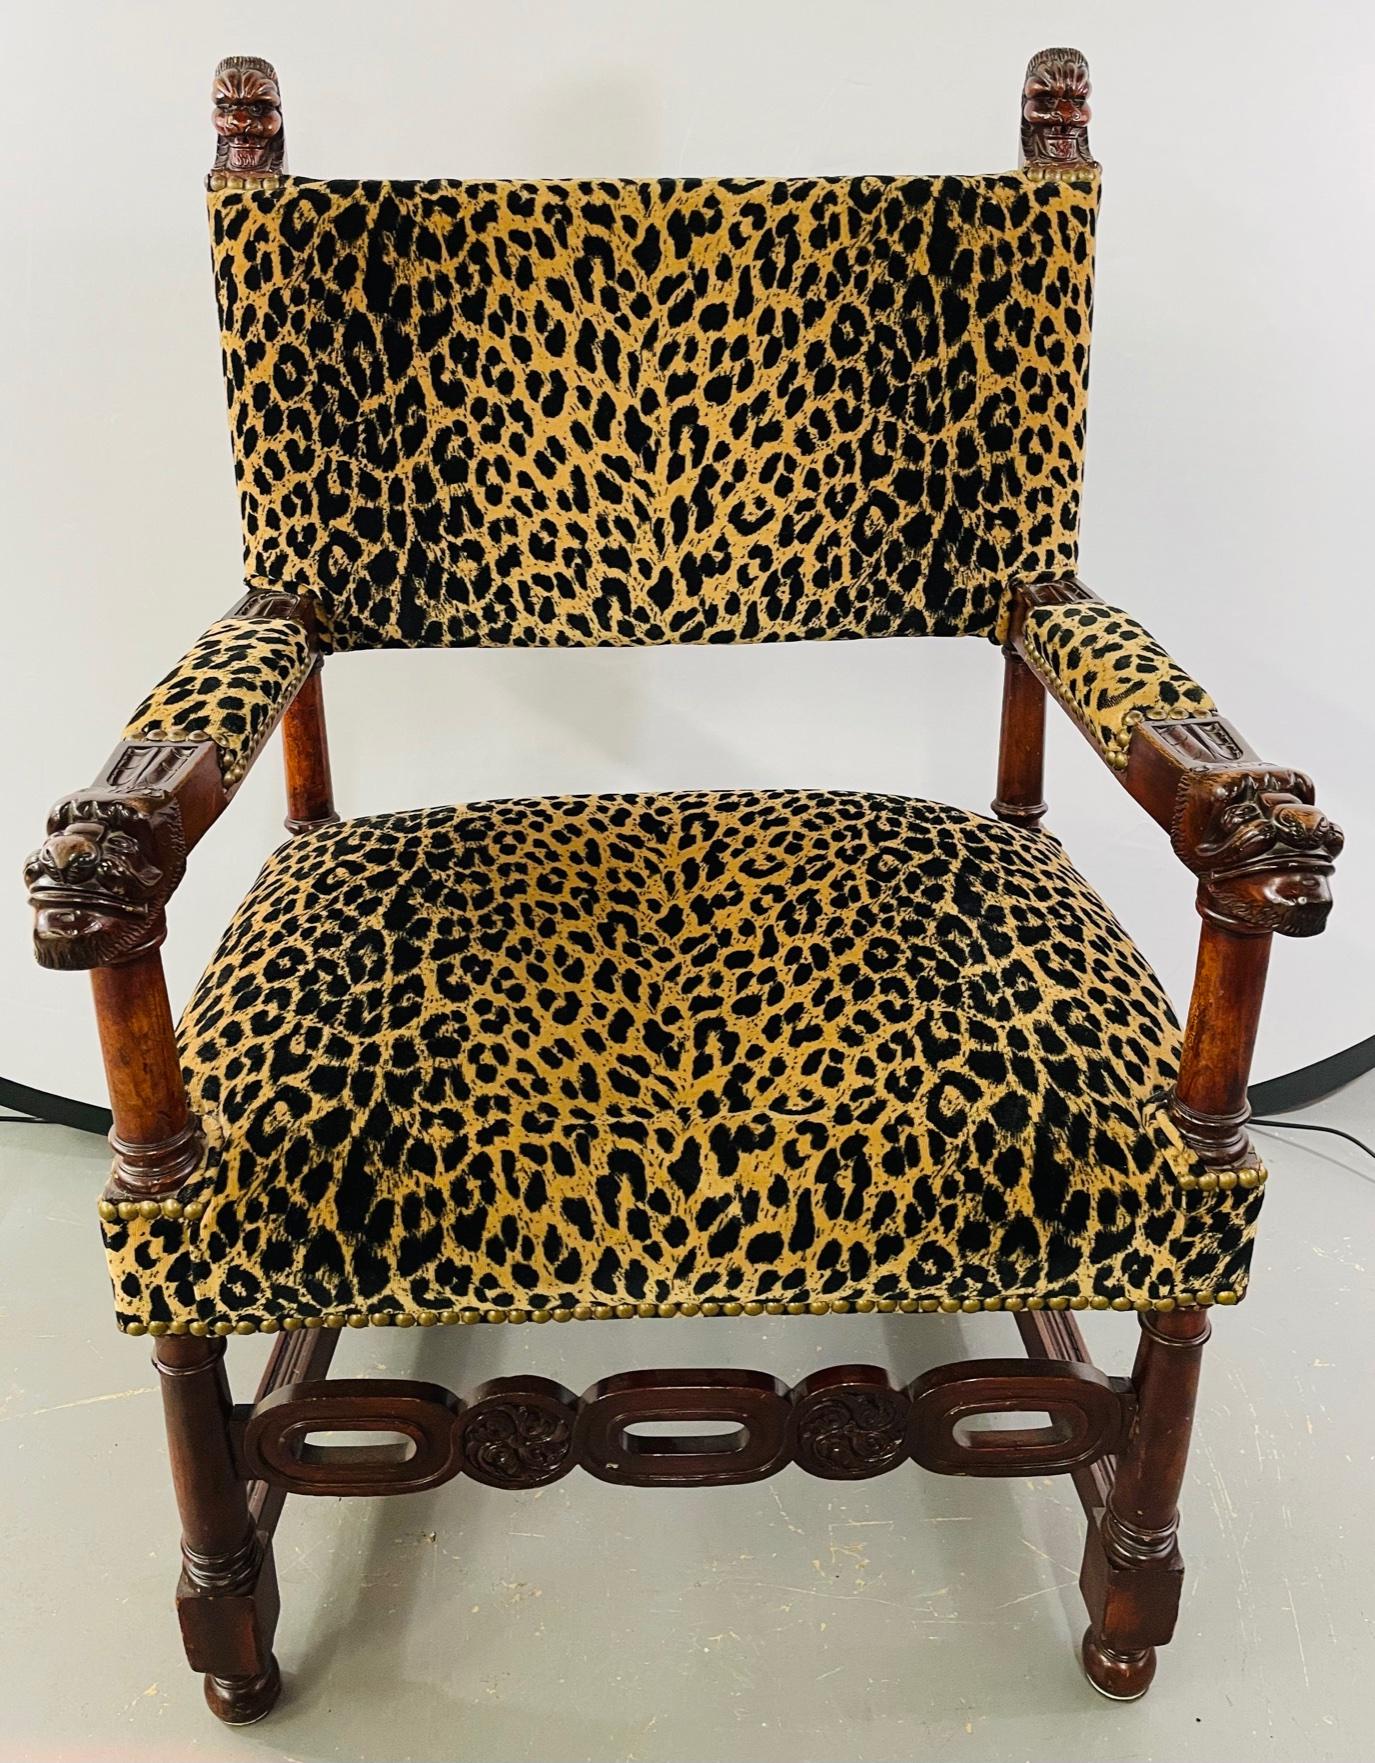 A rare late 19th century Victorian gothic revival chair. The chair is made of solid mahogany skillfully carved in gothic motifs featuring figural design on both arms and on each side of the back of the chair. The chair features leopard upholstery